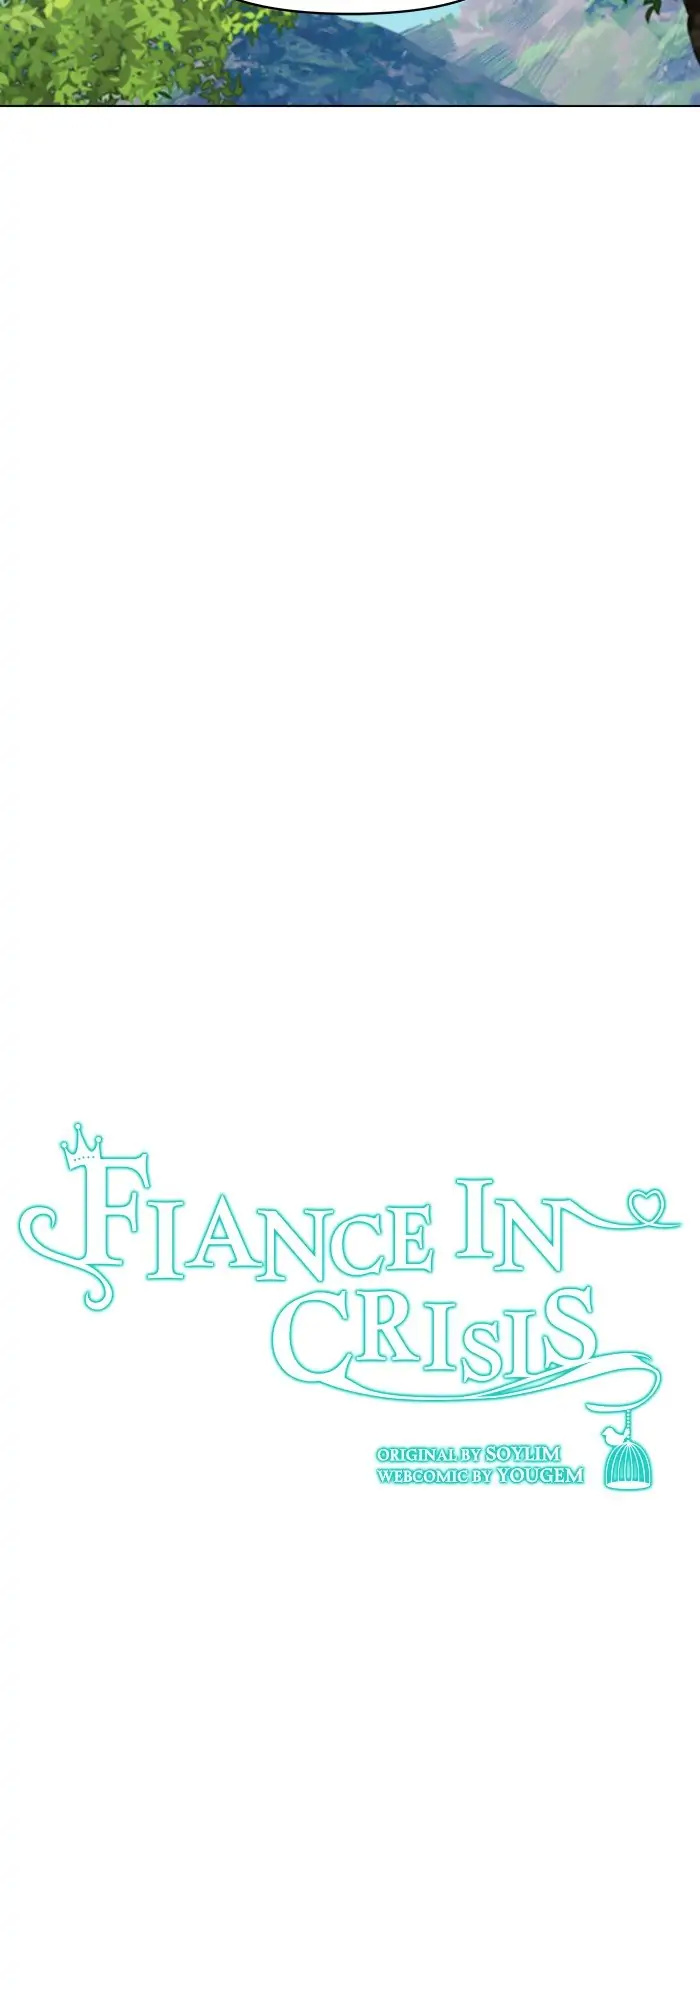 Fiance In Crisis - Page 4